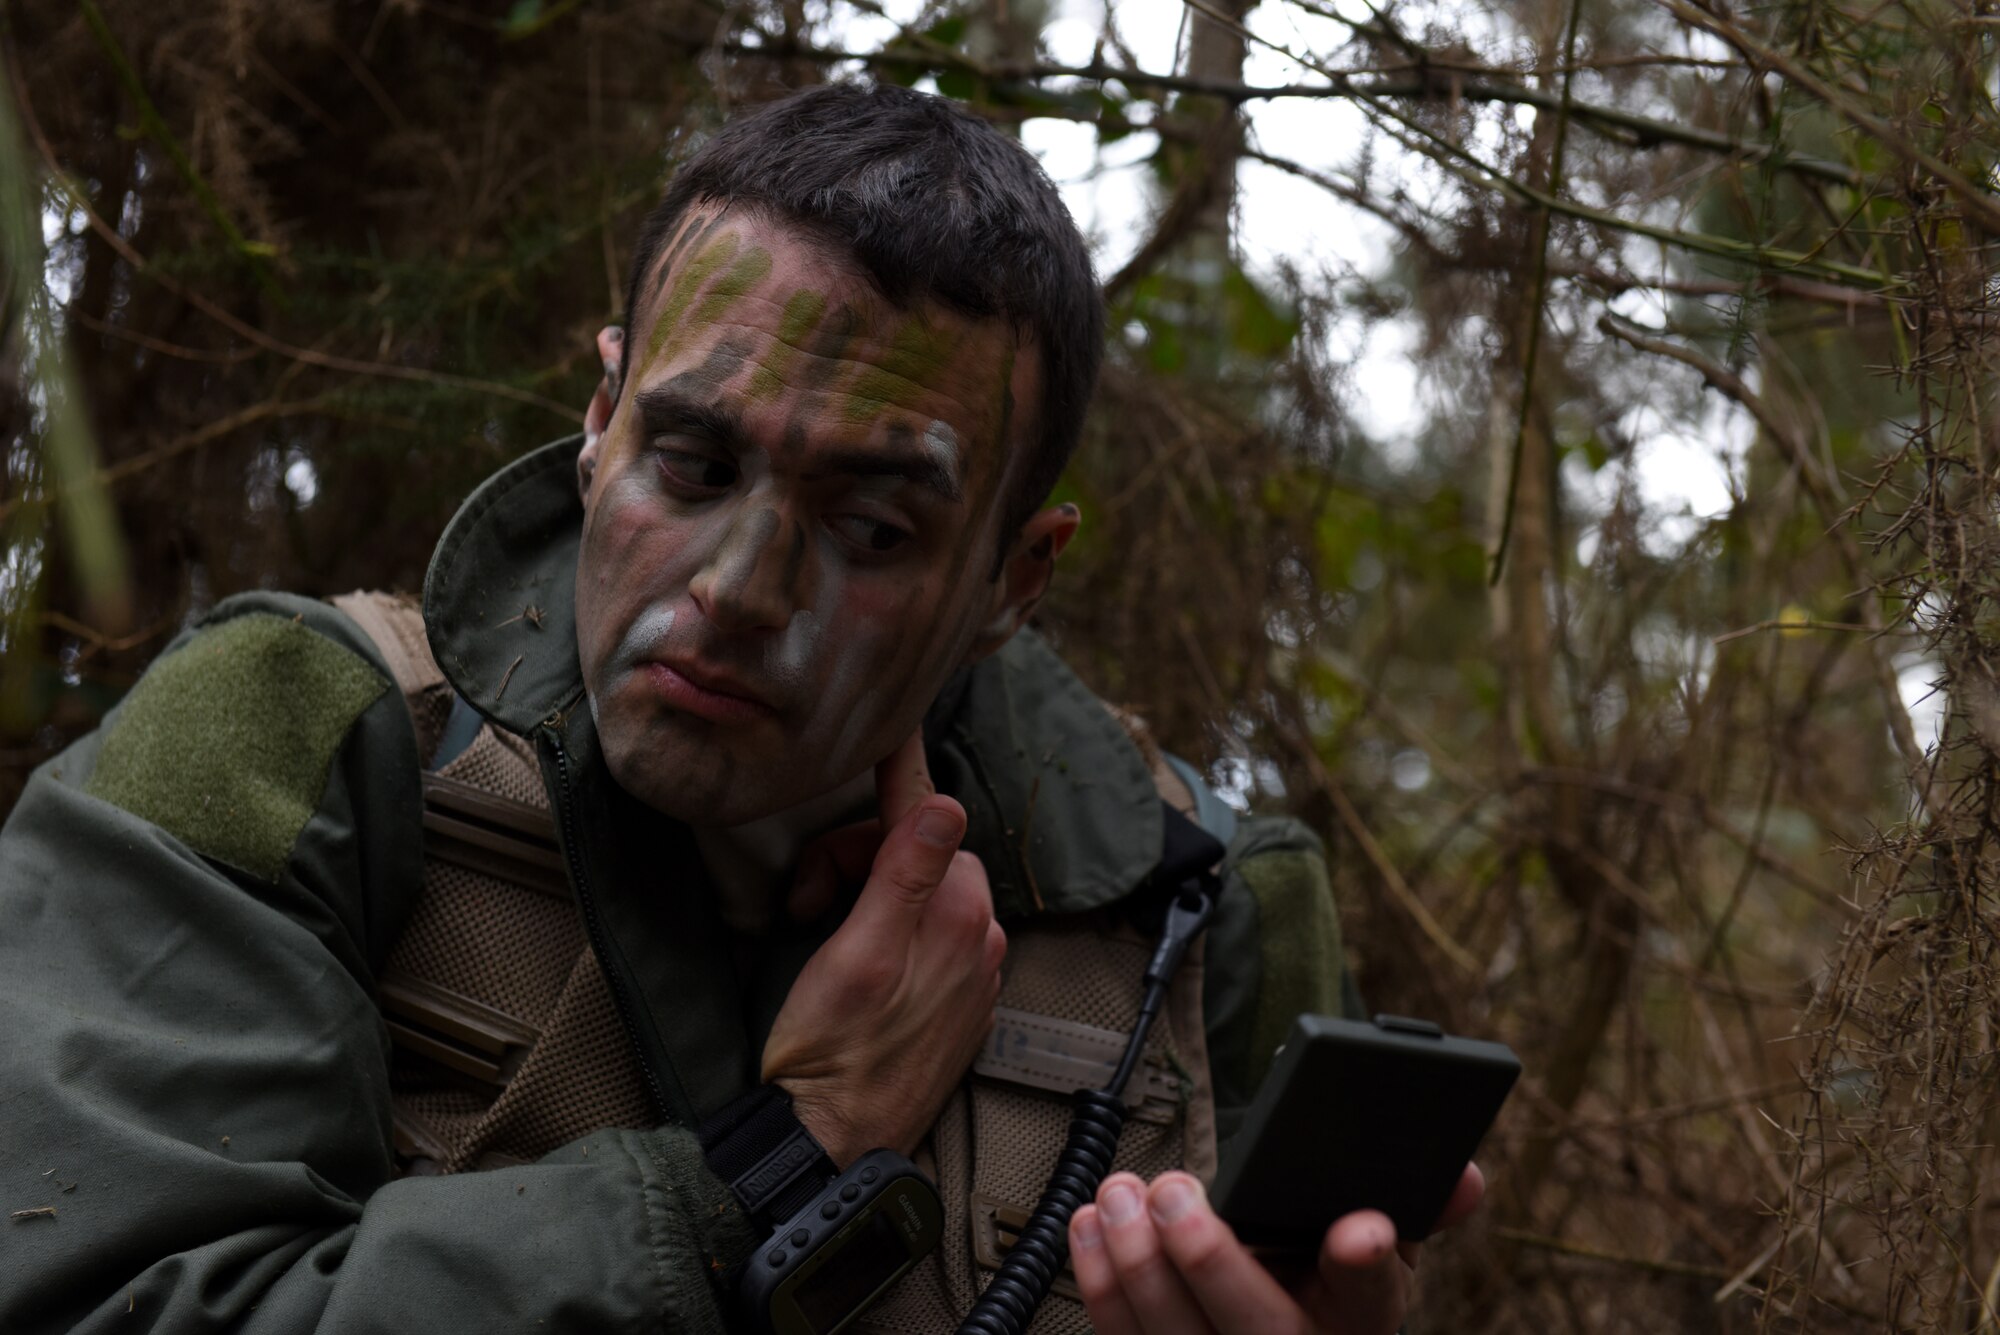 A 48th Fighter Wing Airman applies camouflage face paint during a Survival, Evasion, Resistance, and Escape training course at Stanford Training Area near Thetford, England, March 4, 2020. Camouflage face paint allows class participants to blend into their surroundings which is critical when evading capture. (U.S. Air Force photo by Airman 1st Class Rhonda Smith)